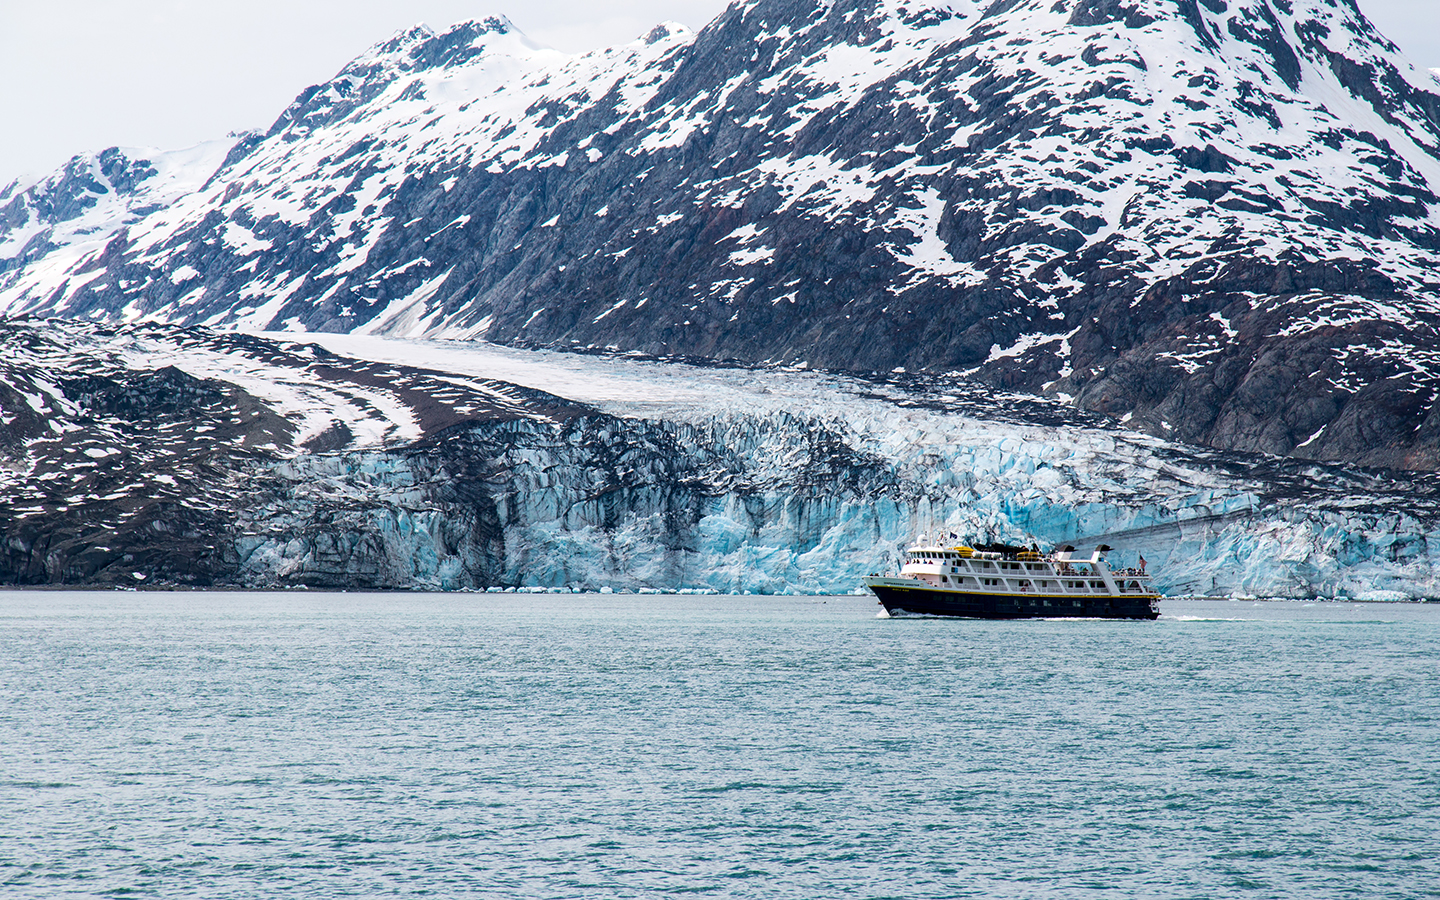 A small ship seen in front of a blue tidewater glacier in Alaska